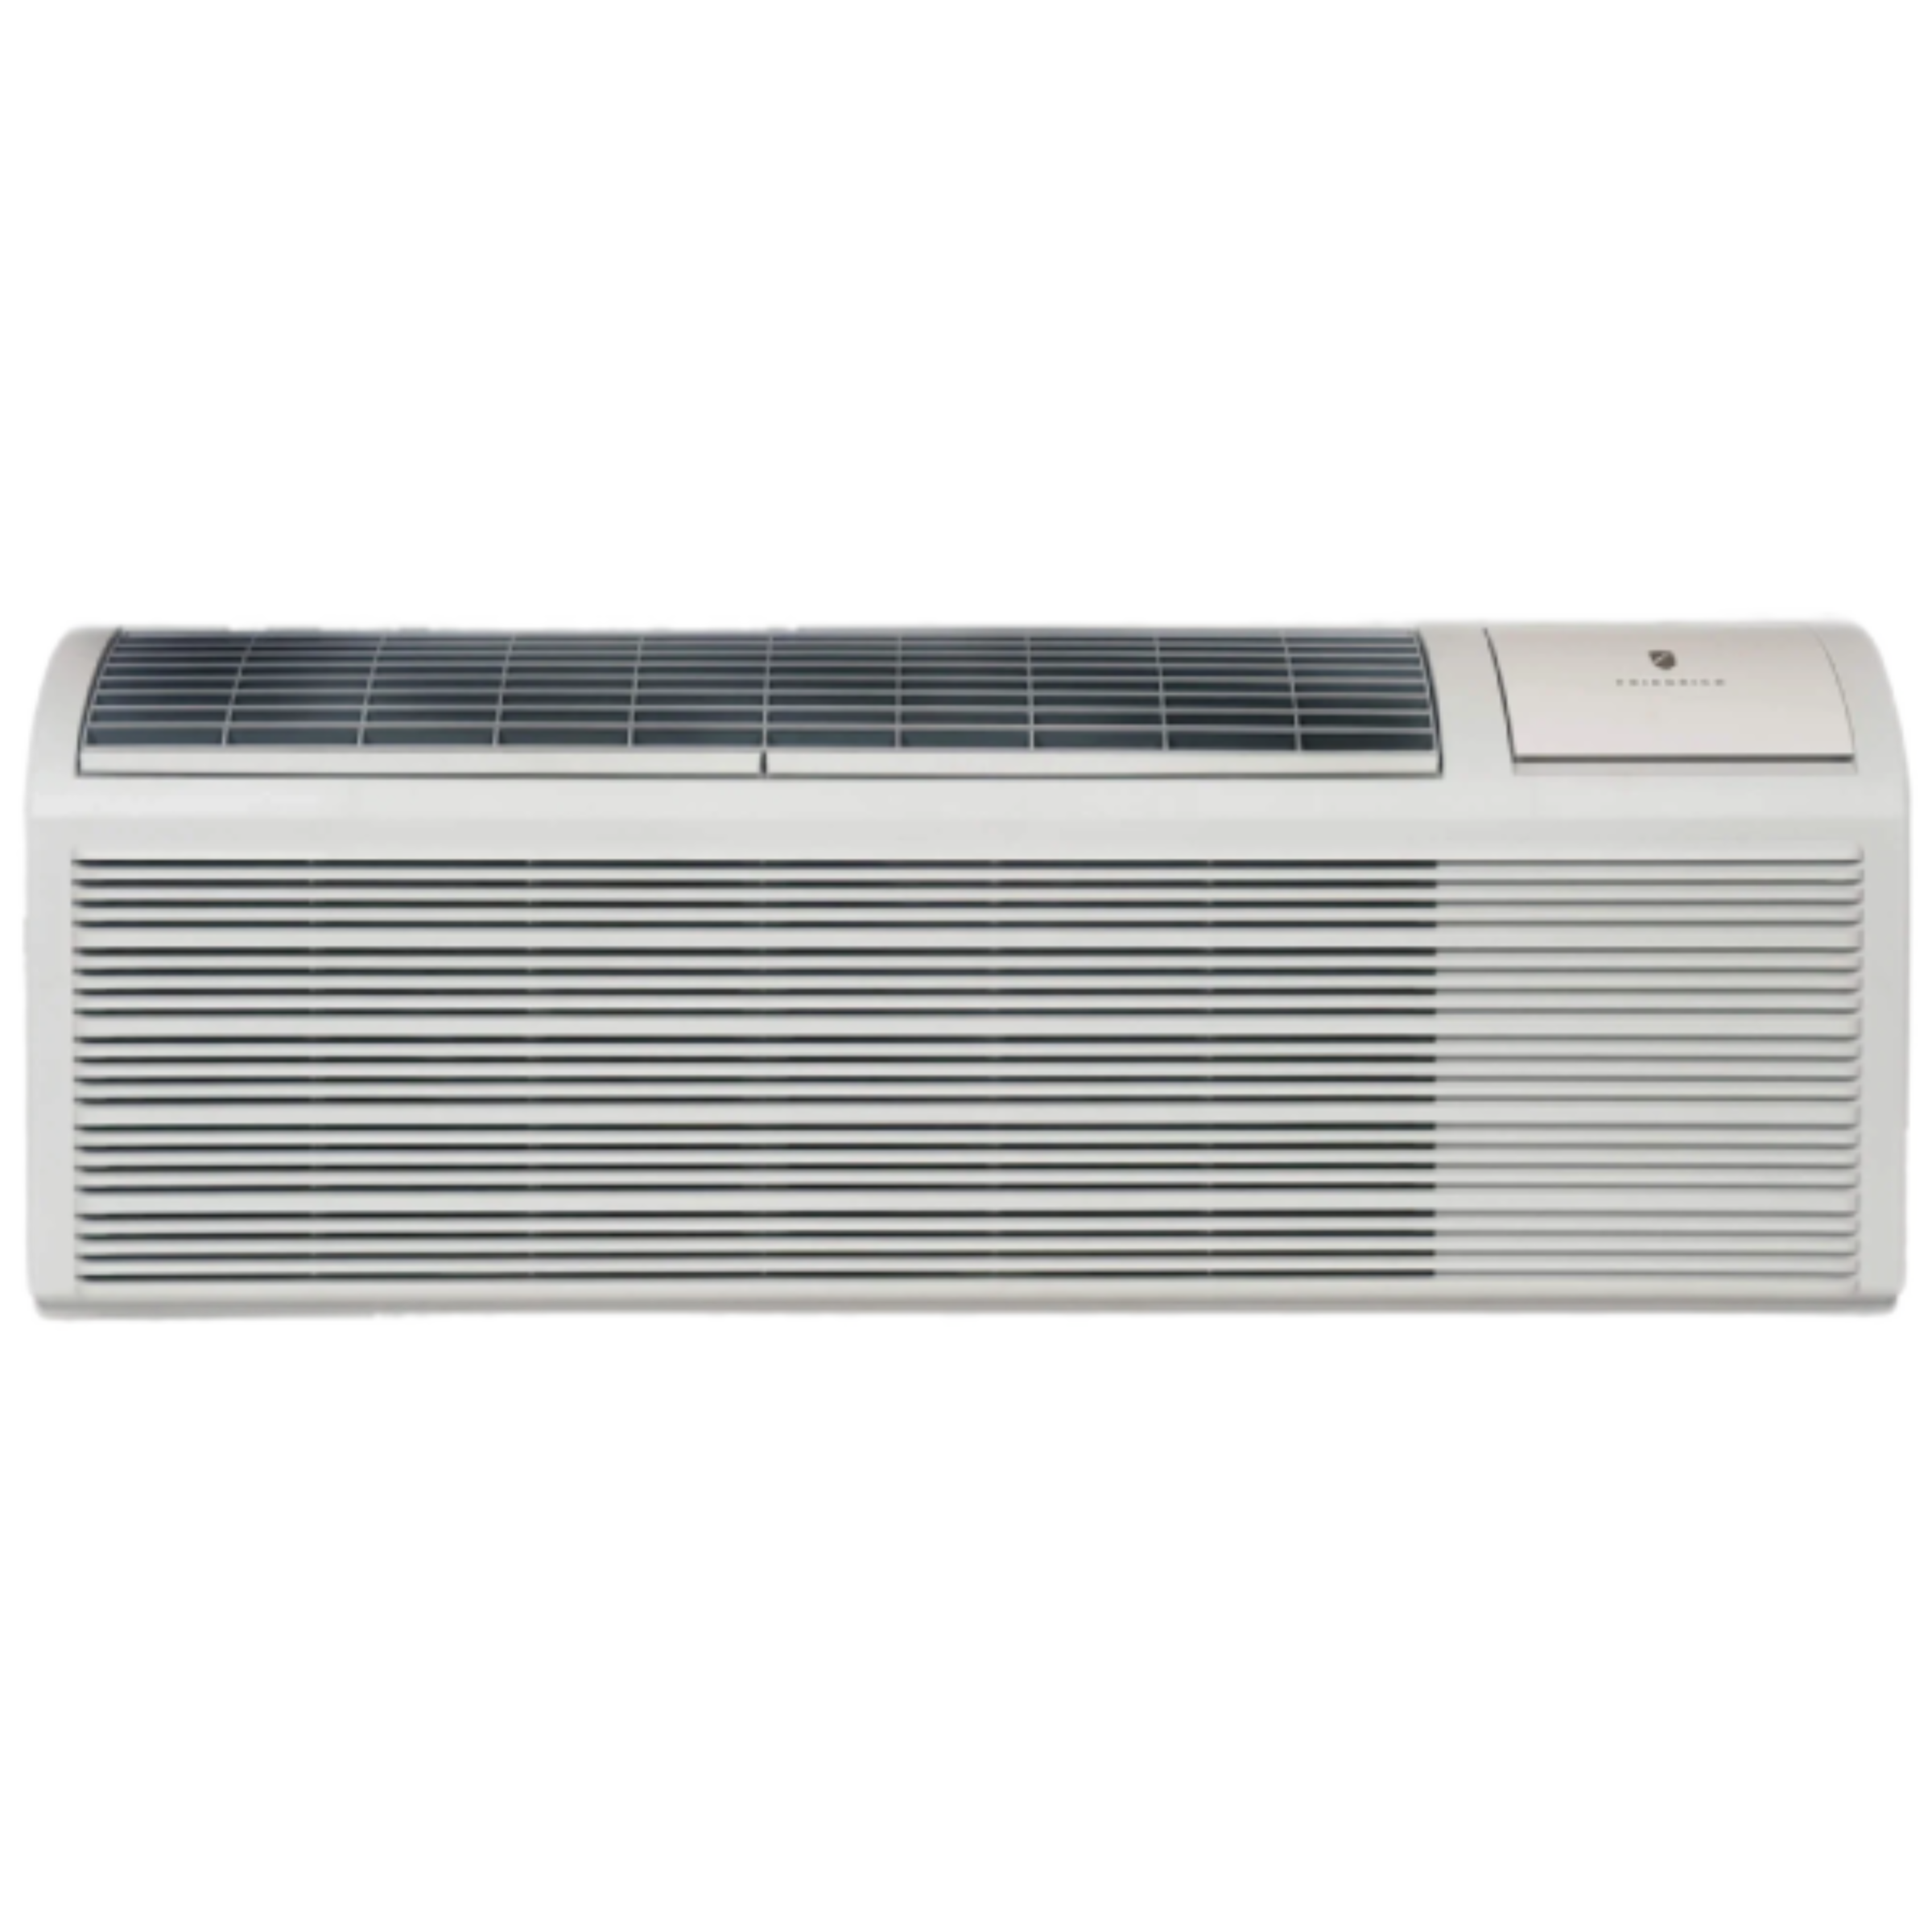 Friedrich ZoneAire Premier Packaged Terminal Air Conditioner with Electric Heat Model PDE15K3SG, 10.4 EER, 230 V, 400 CFM, 14500 BTU